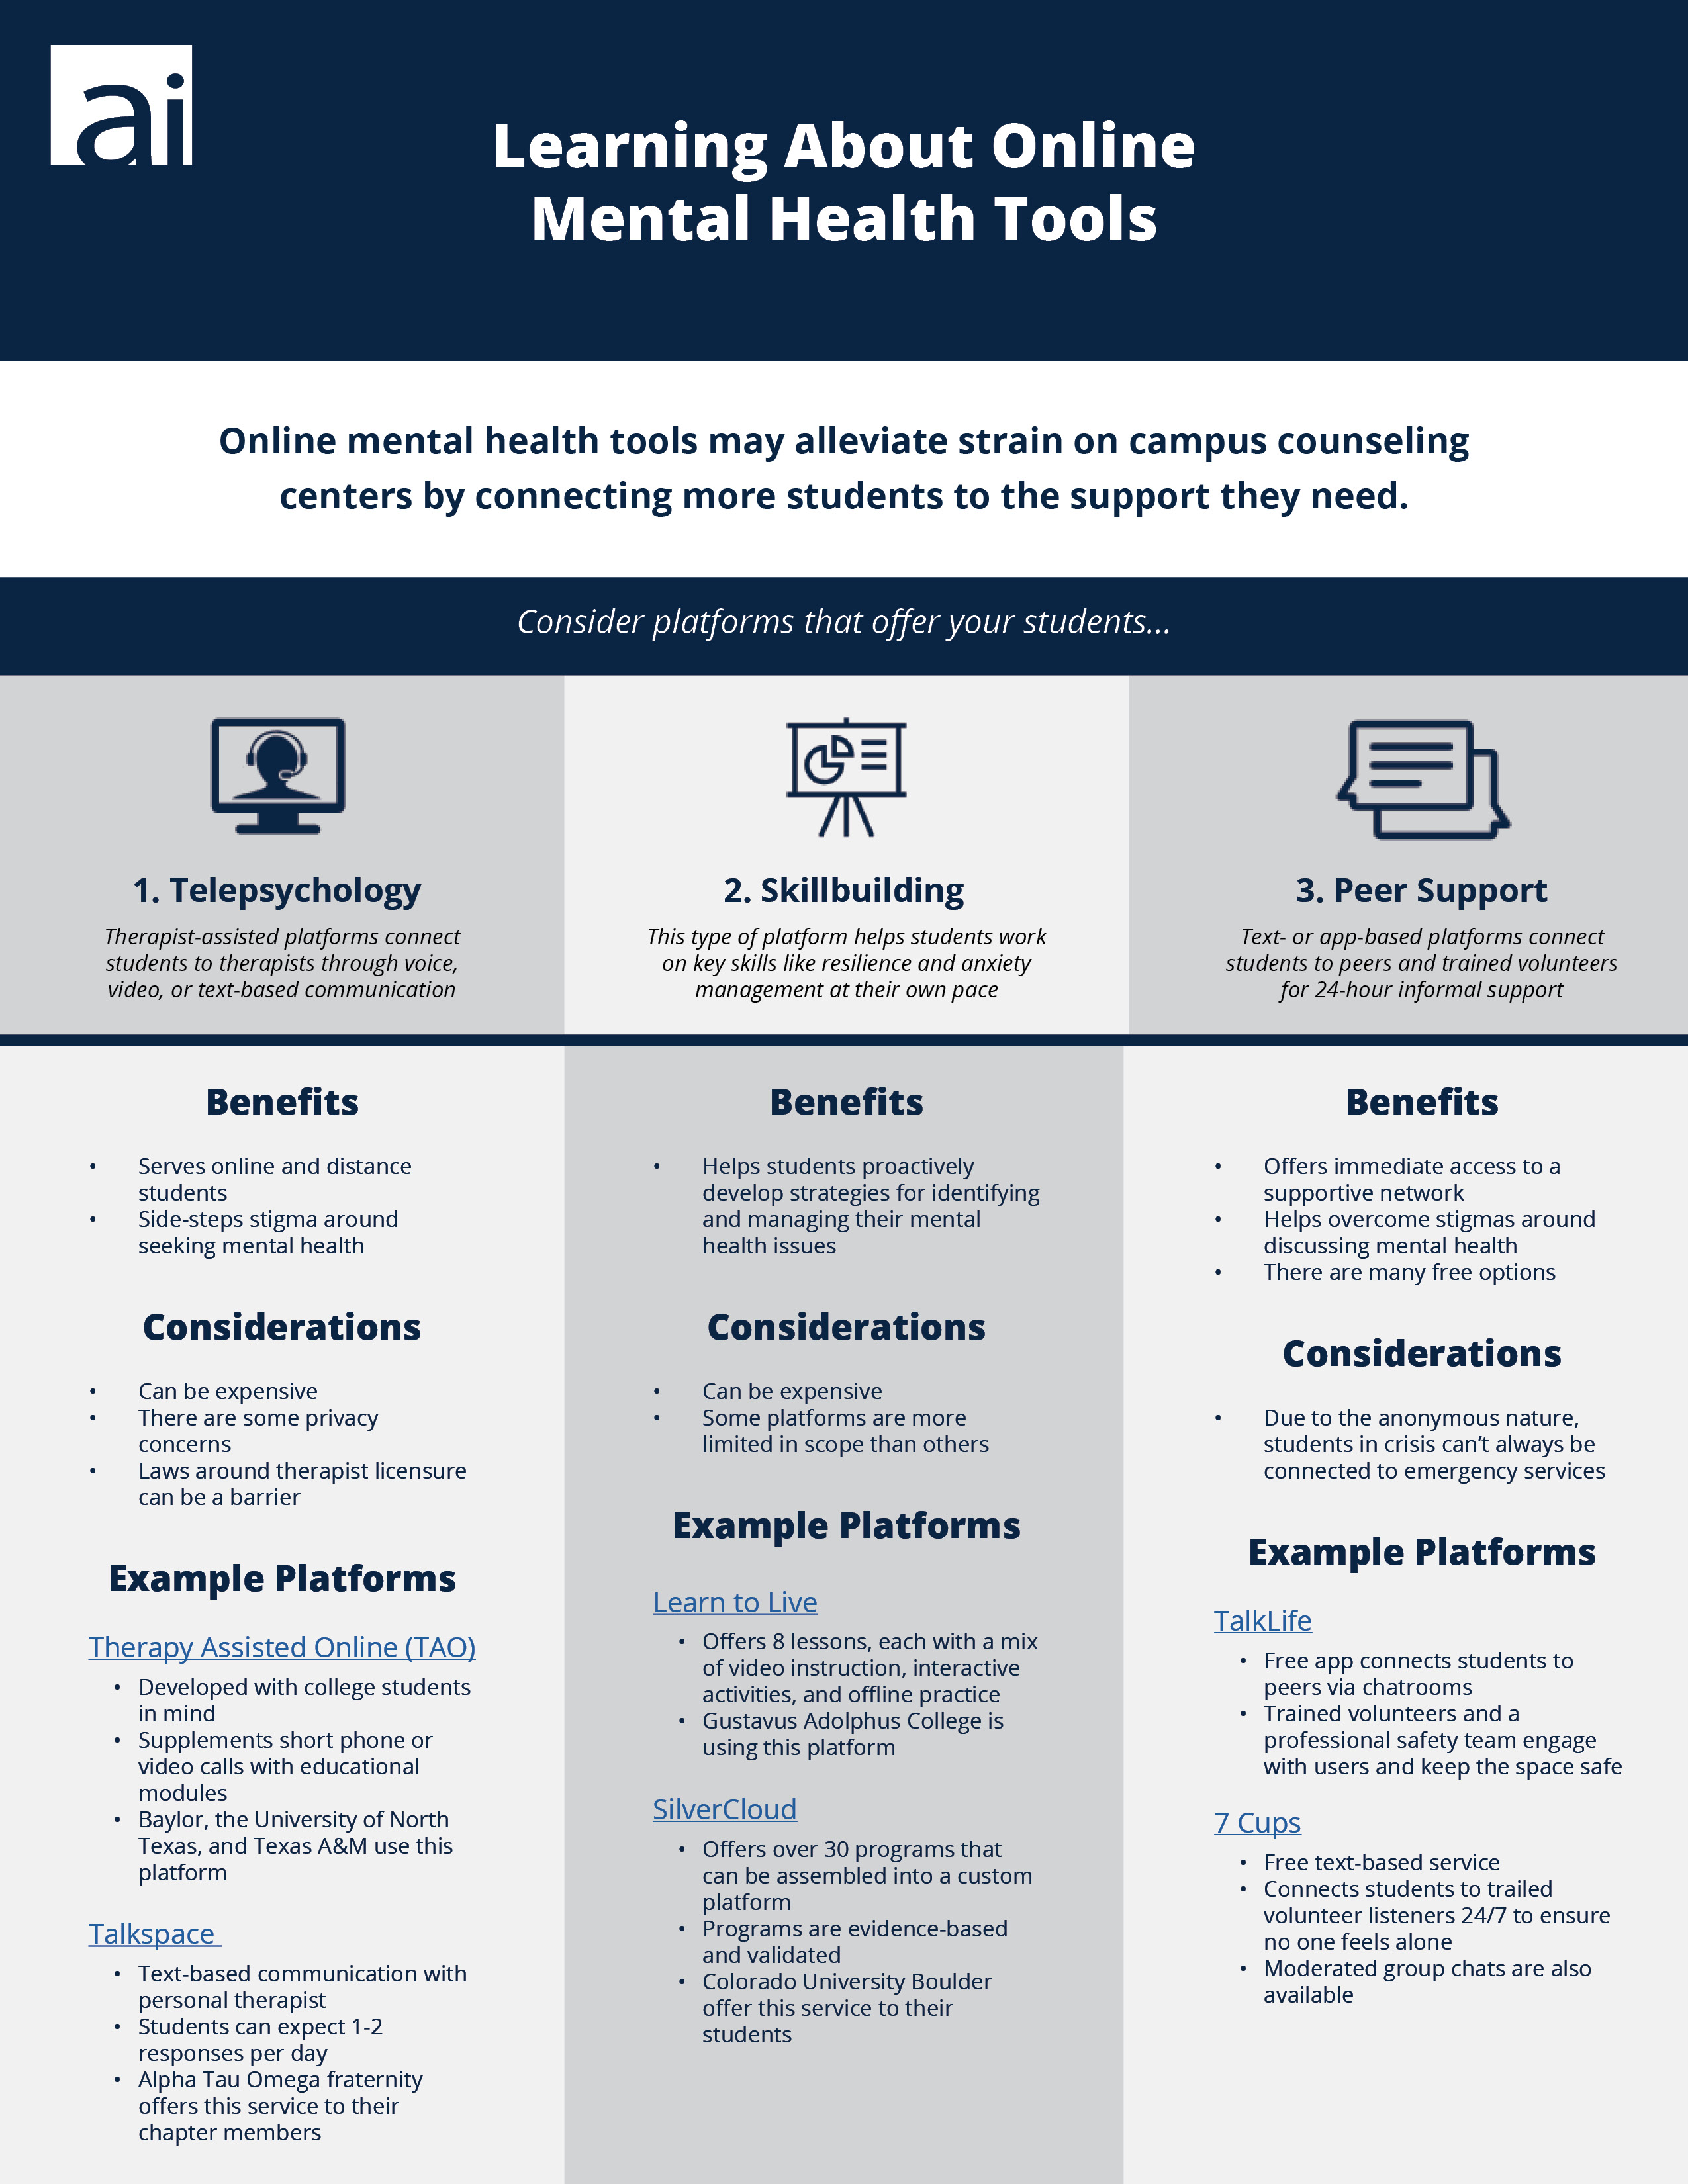 Image of "Learning about Online Mental Health Tools" PDF. 